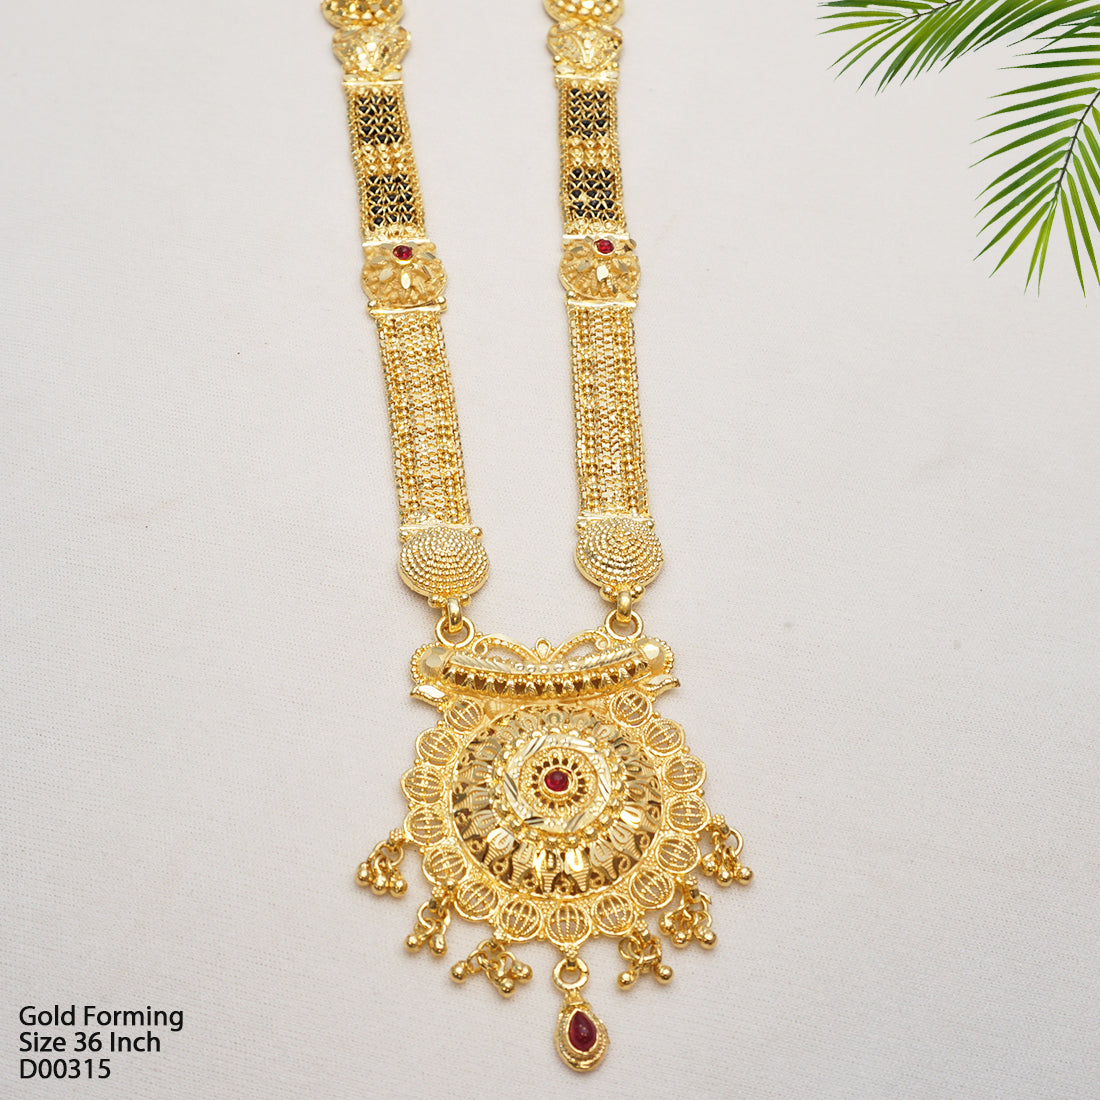 Forming Mangalsutra 36 inch